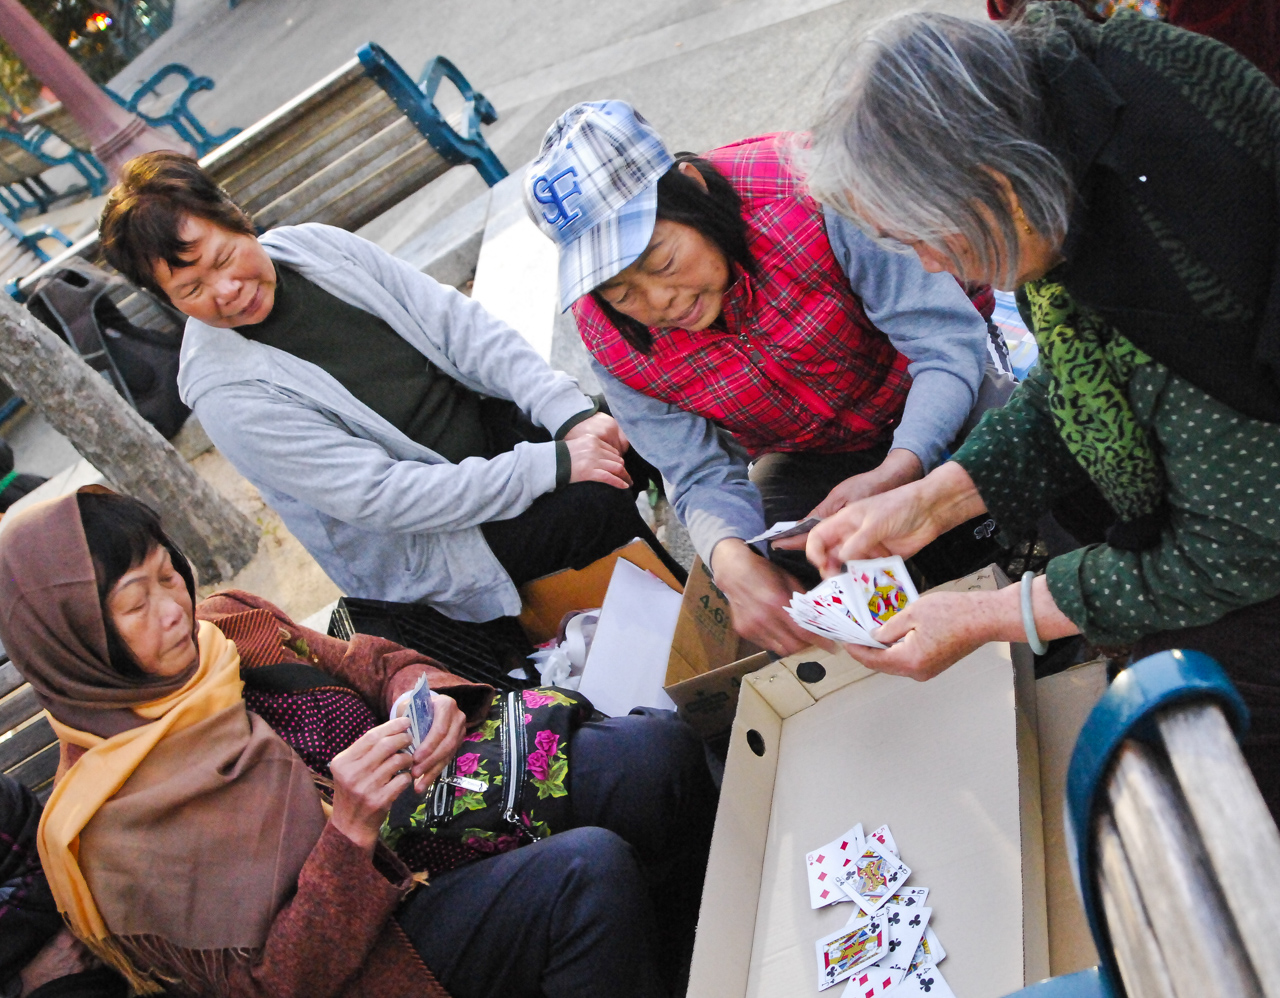 Card players in Portsmouth Square Plaza, China Town